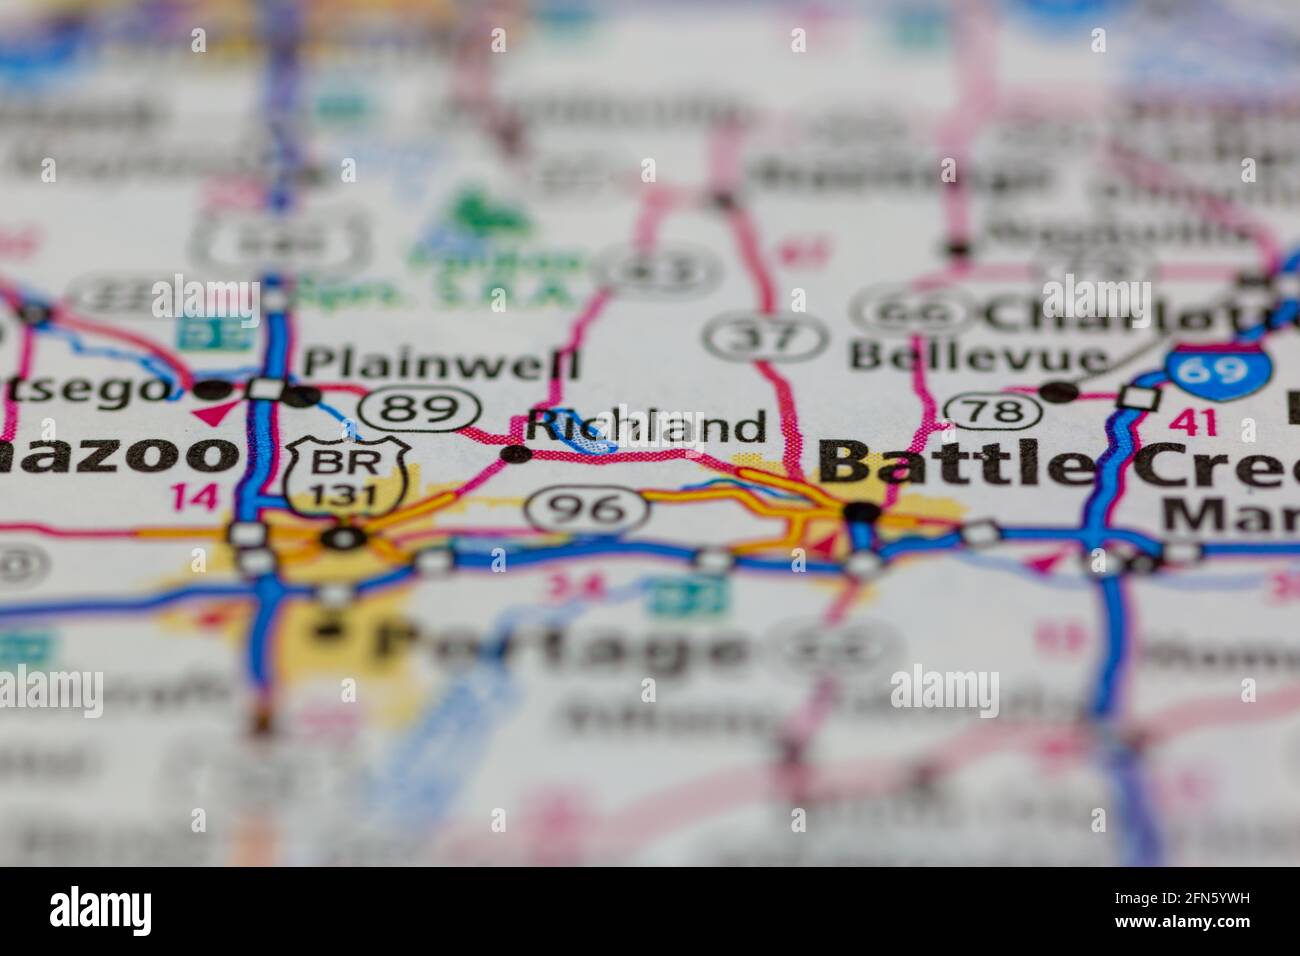 Richland Michigan USA shown on a Geography map or road map Stock Photo